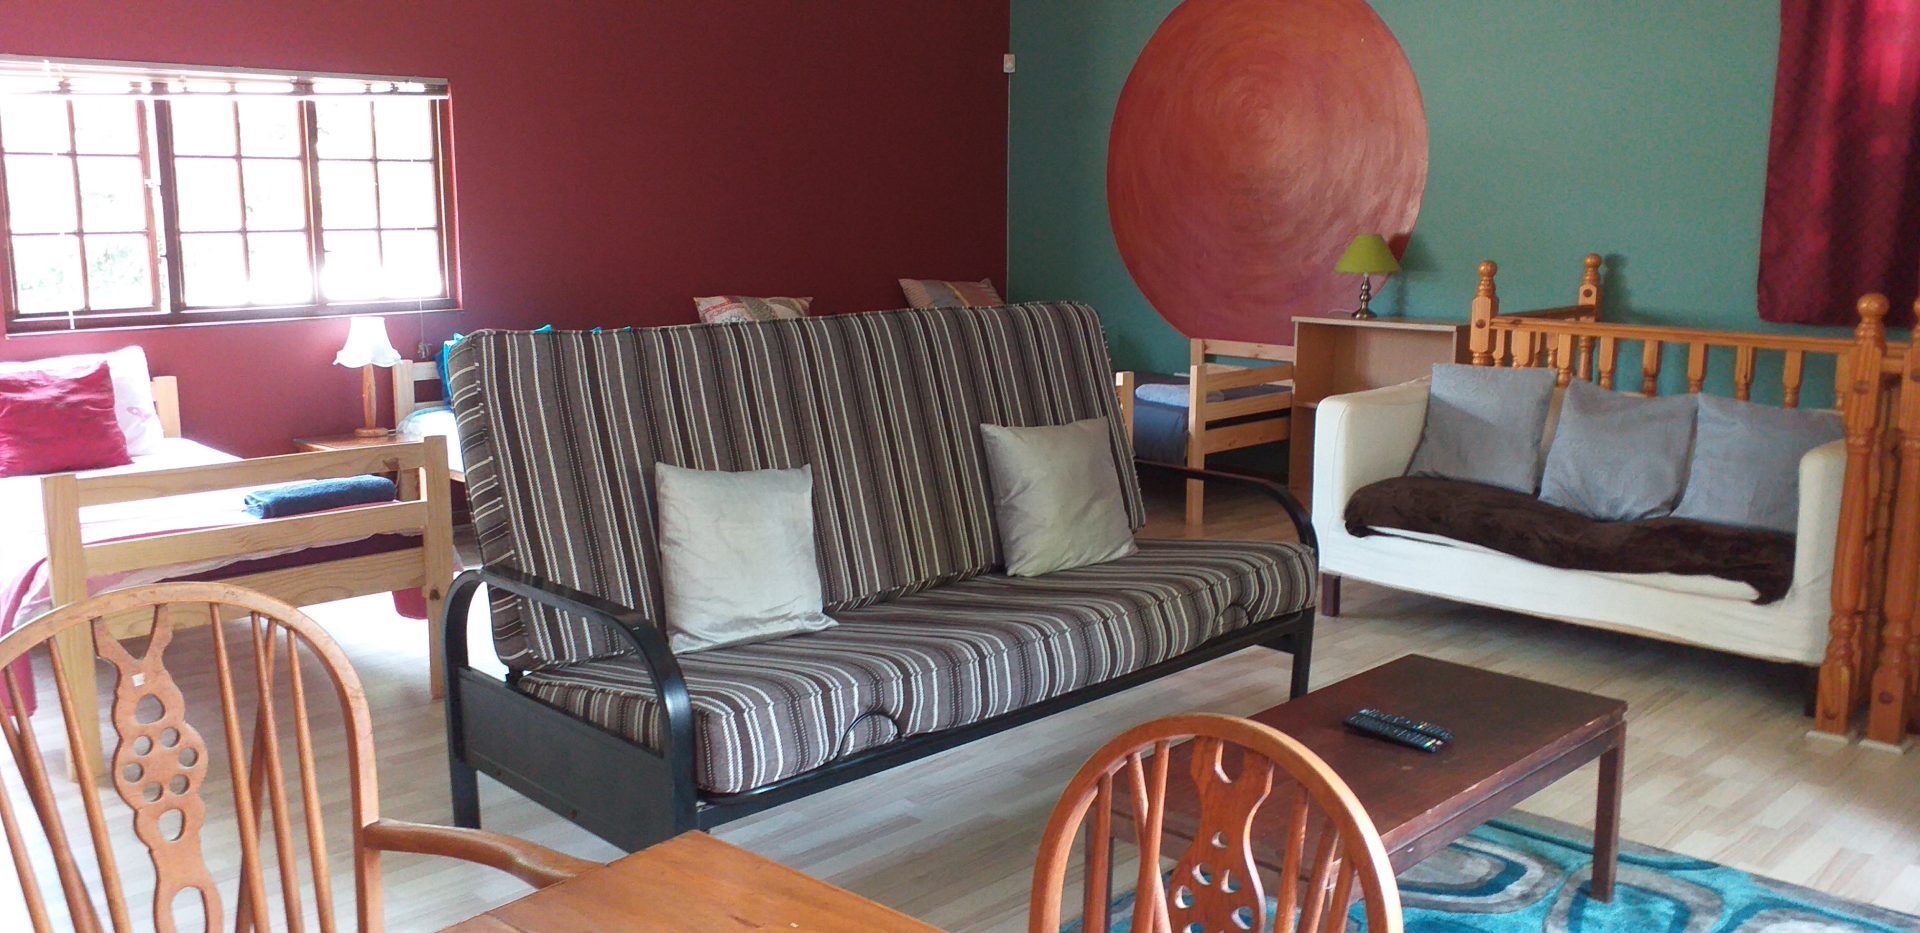 The Aapartment Self Catering Sleeps 6